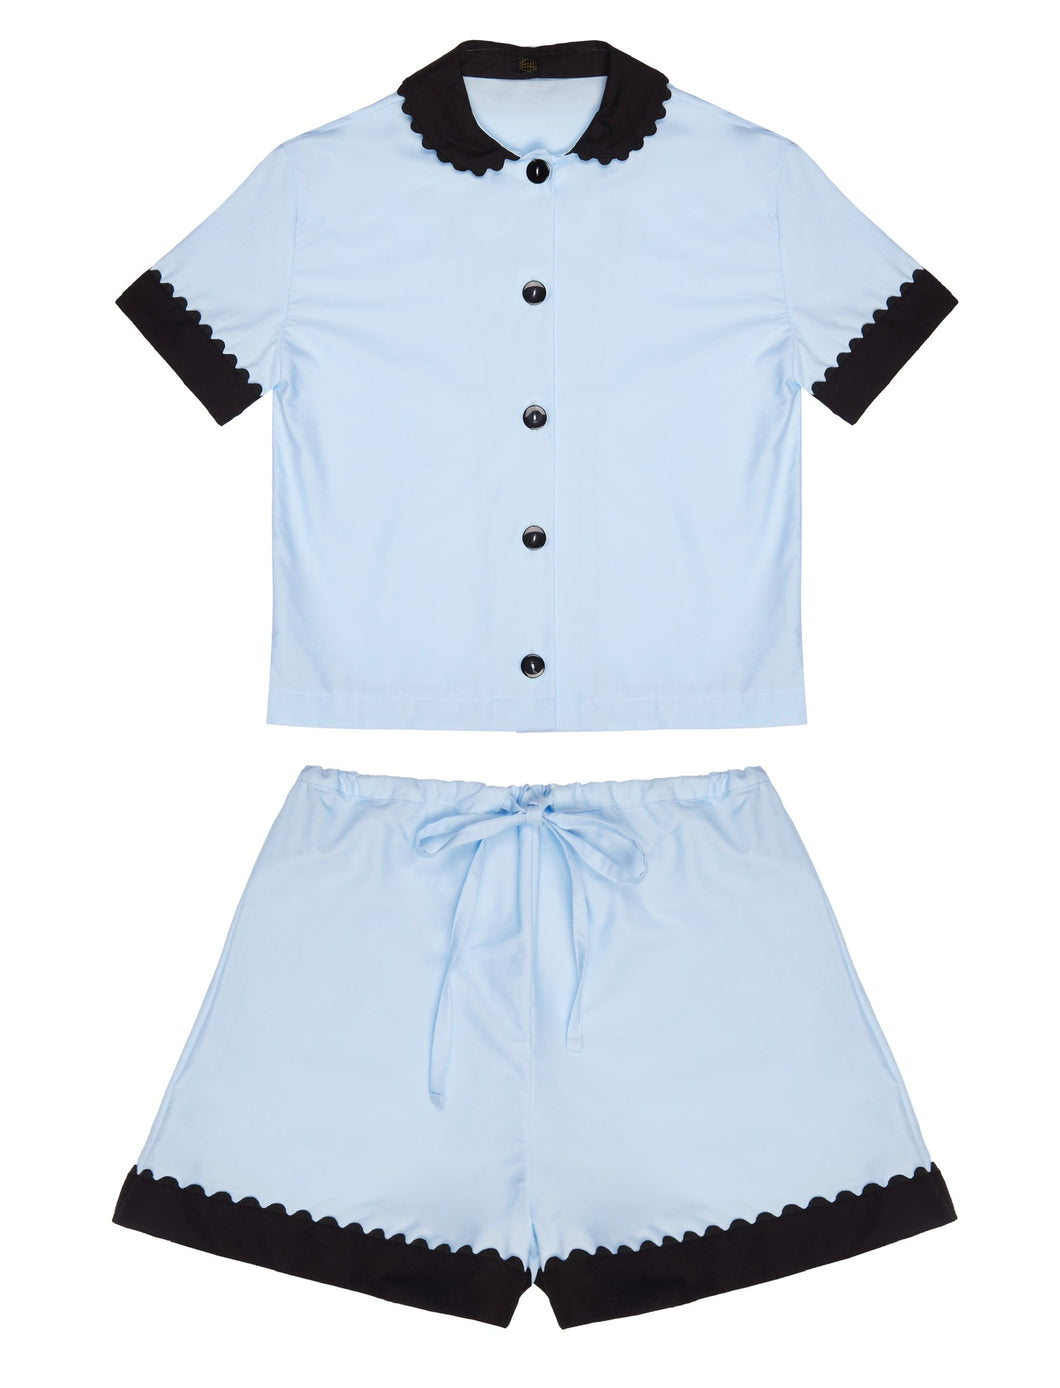 100% Cotton Poplin Pyjamas in Blue with Black Contrasting Collar and Cuffs with Ric Rac Trim